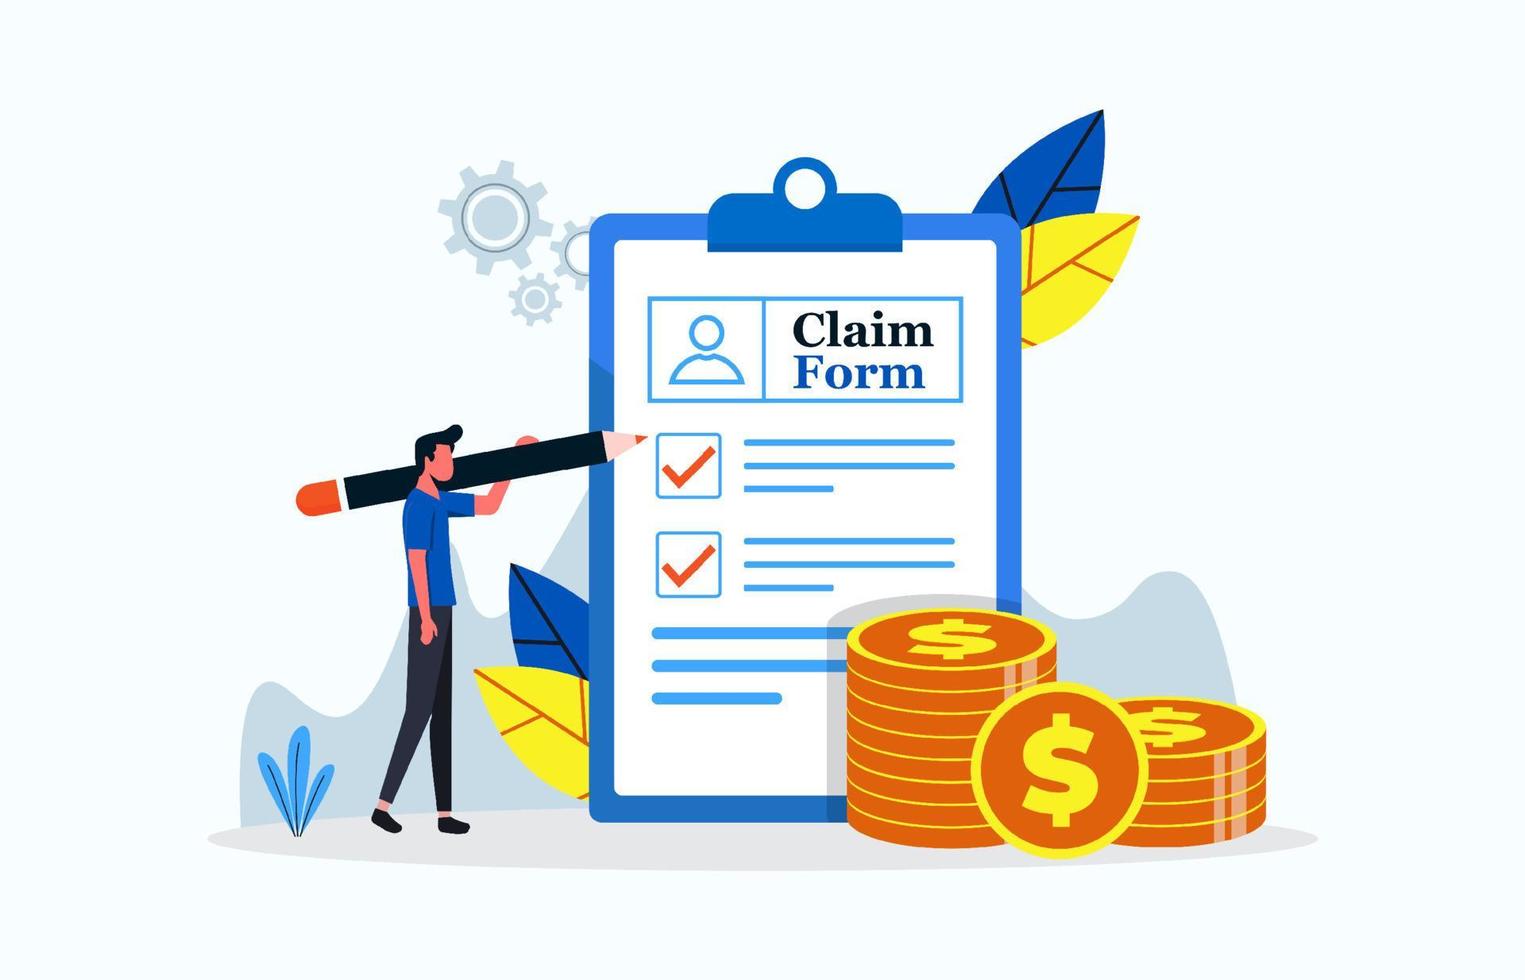 Claim form with with check mark and money symbol. Businessman fill in claim document vector illustration